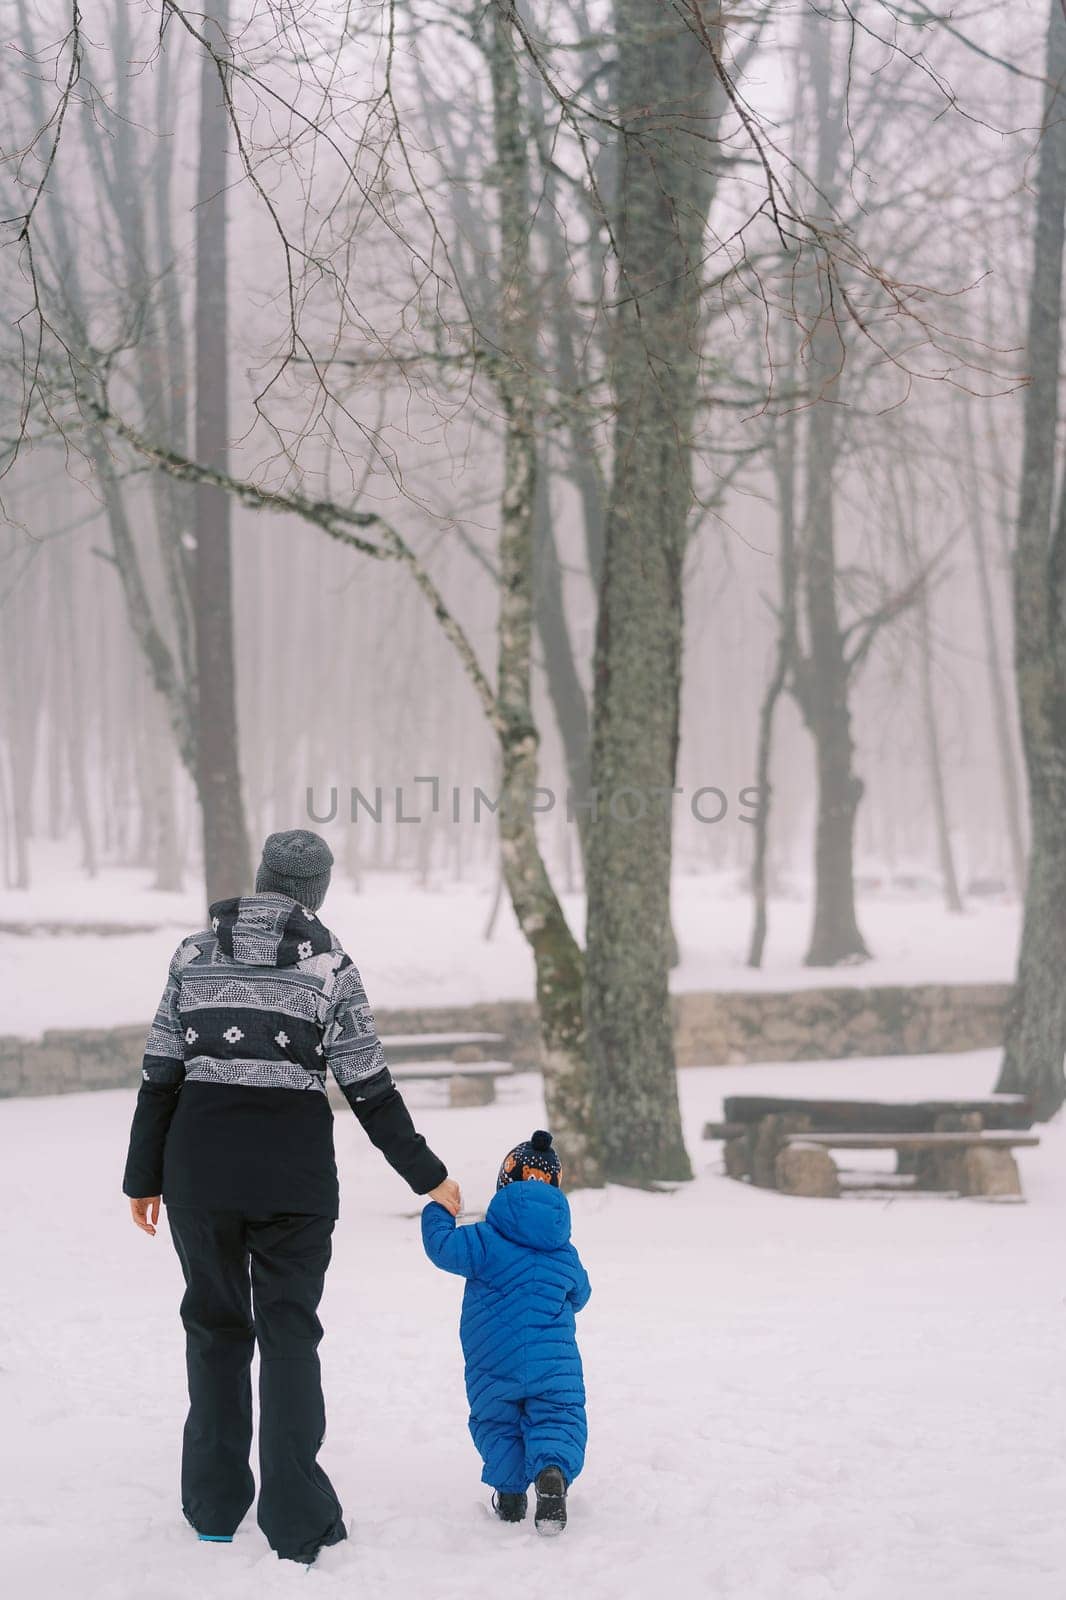 Mom leads a small child by the hand through a snowy forest. Back view. High quality photo